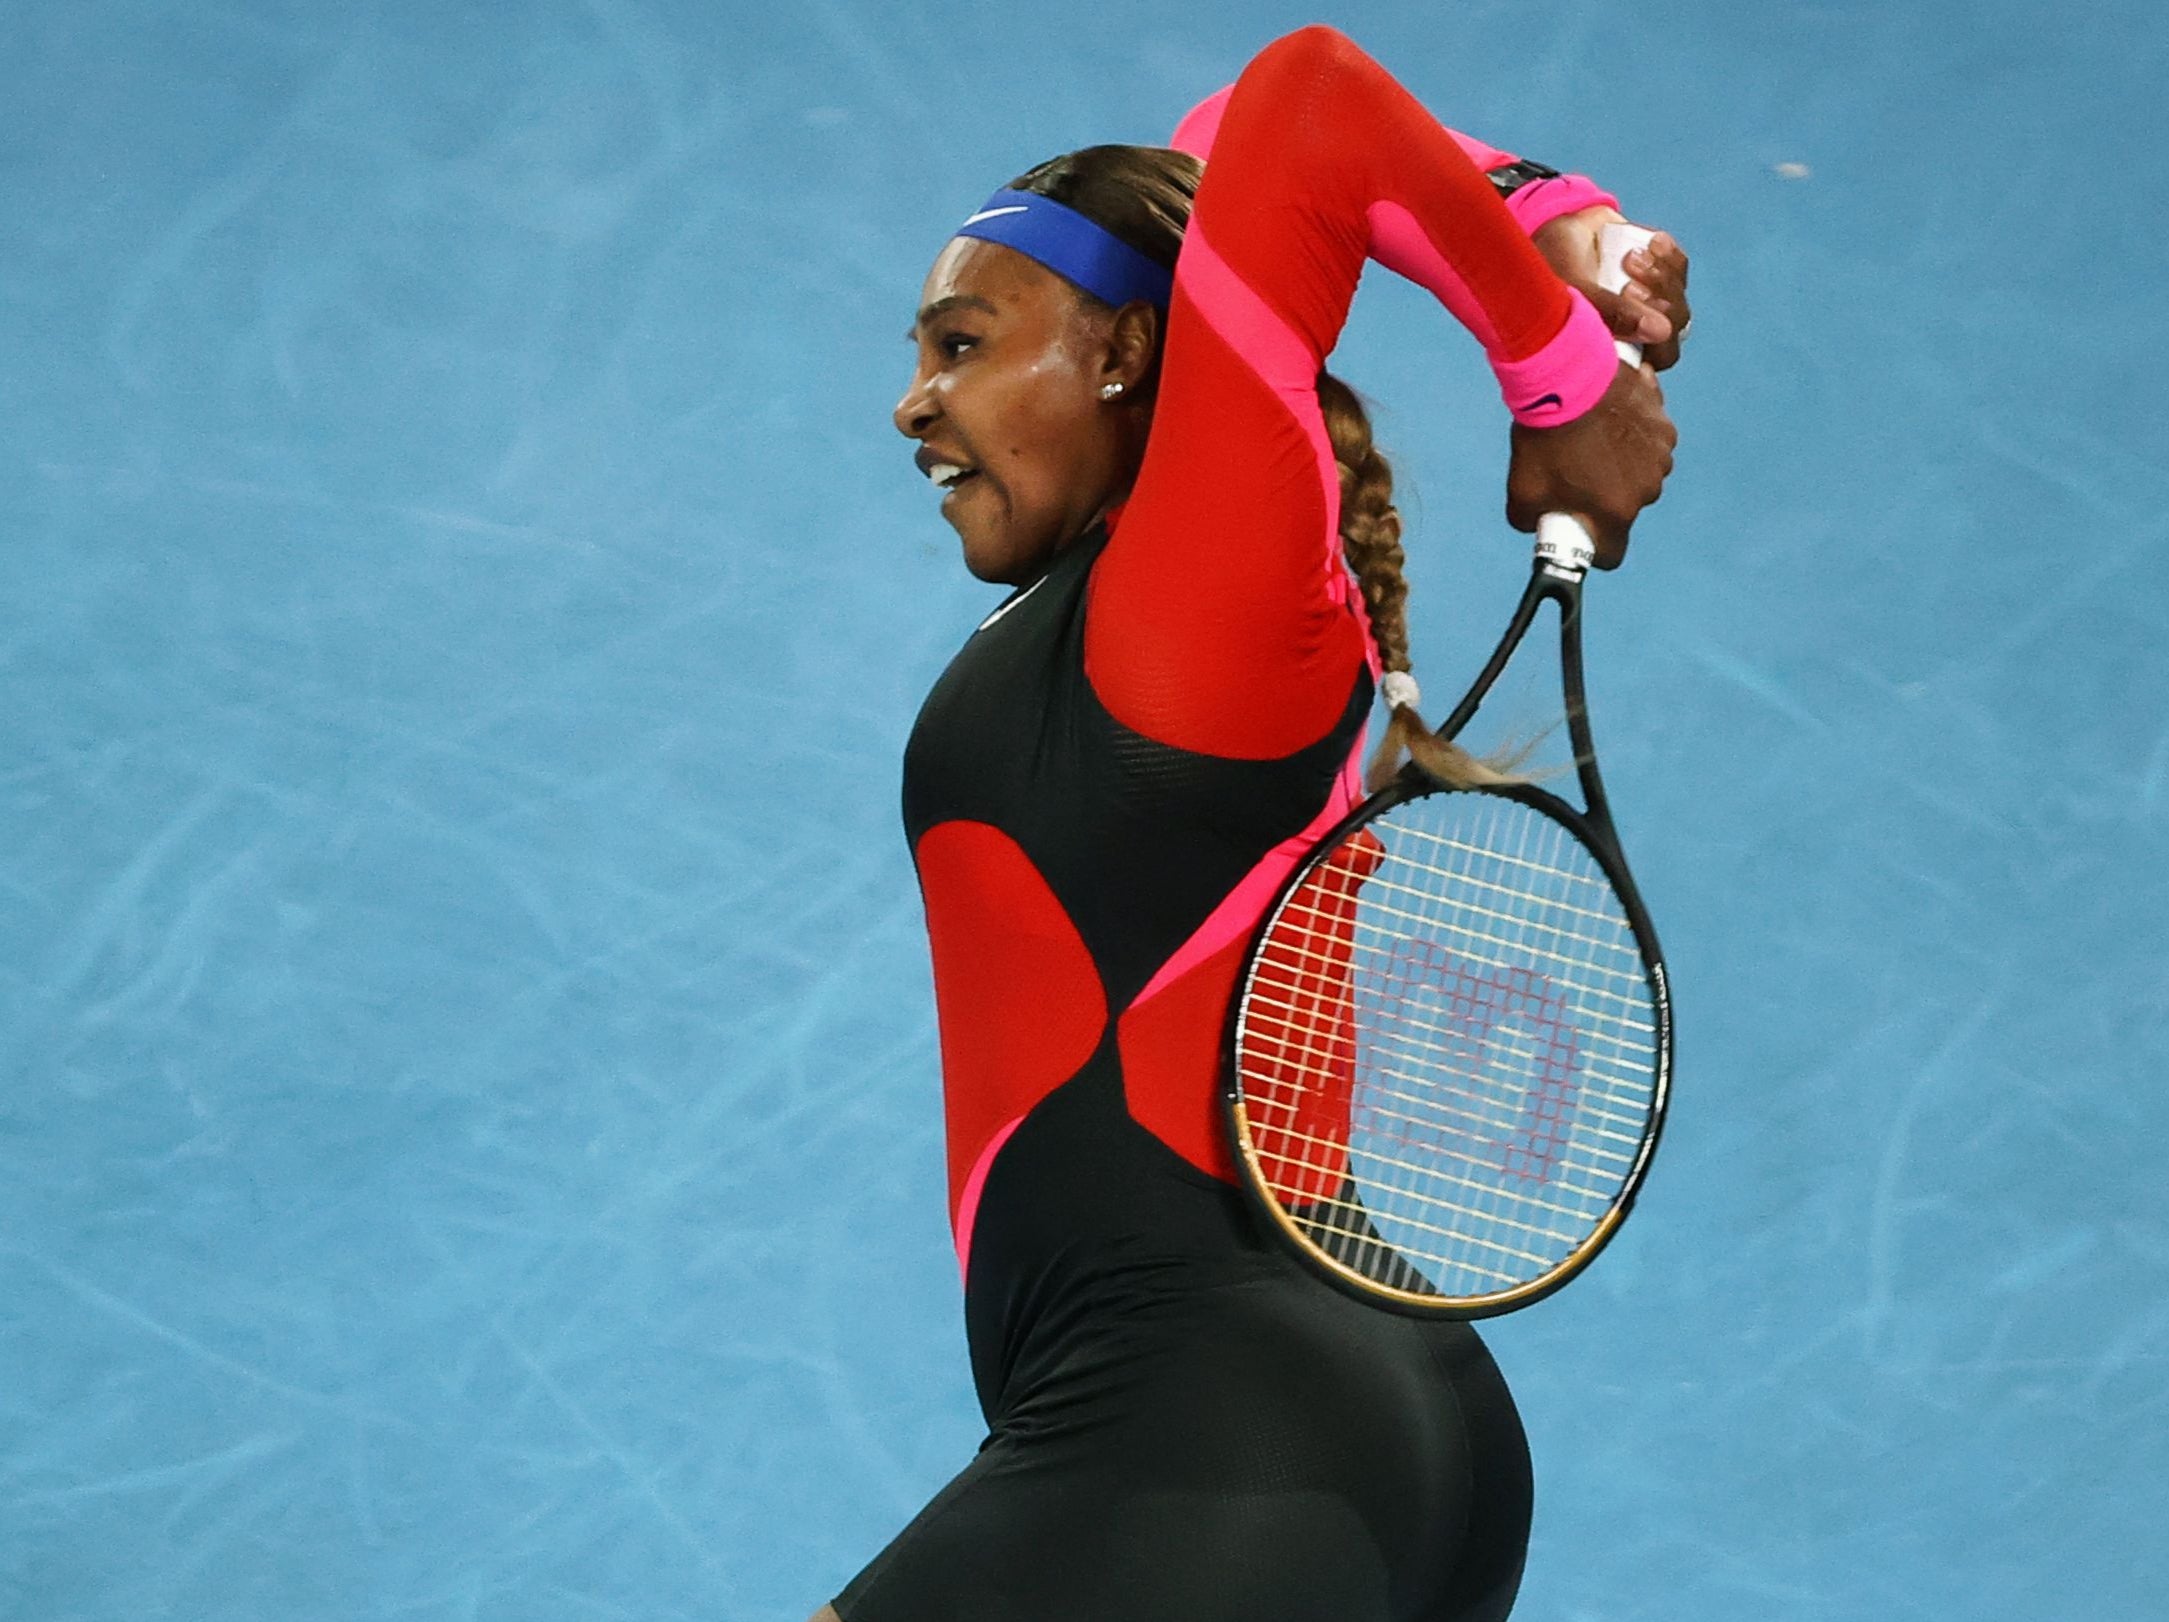 Serena Williams progressed to the final four in Melbourne